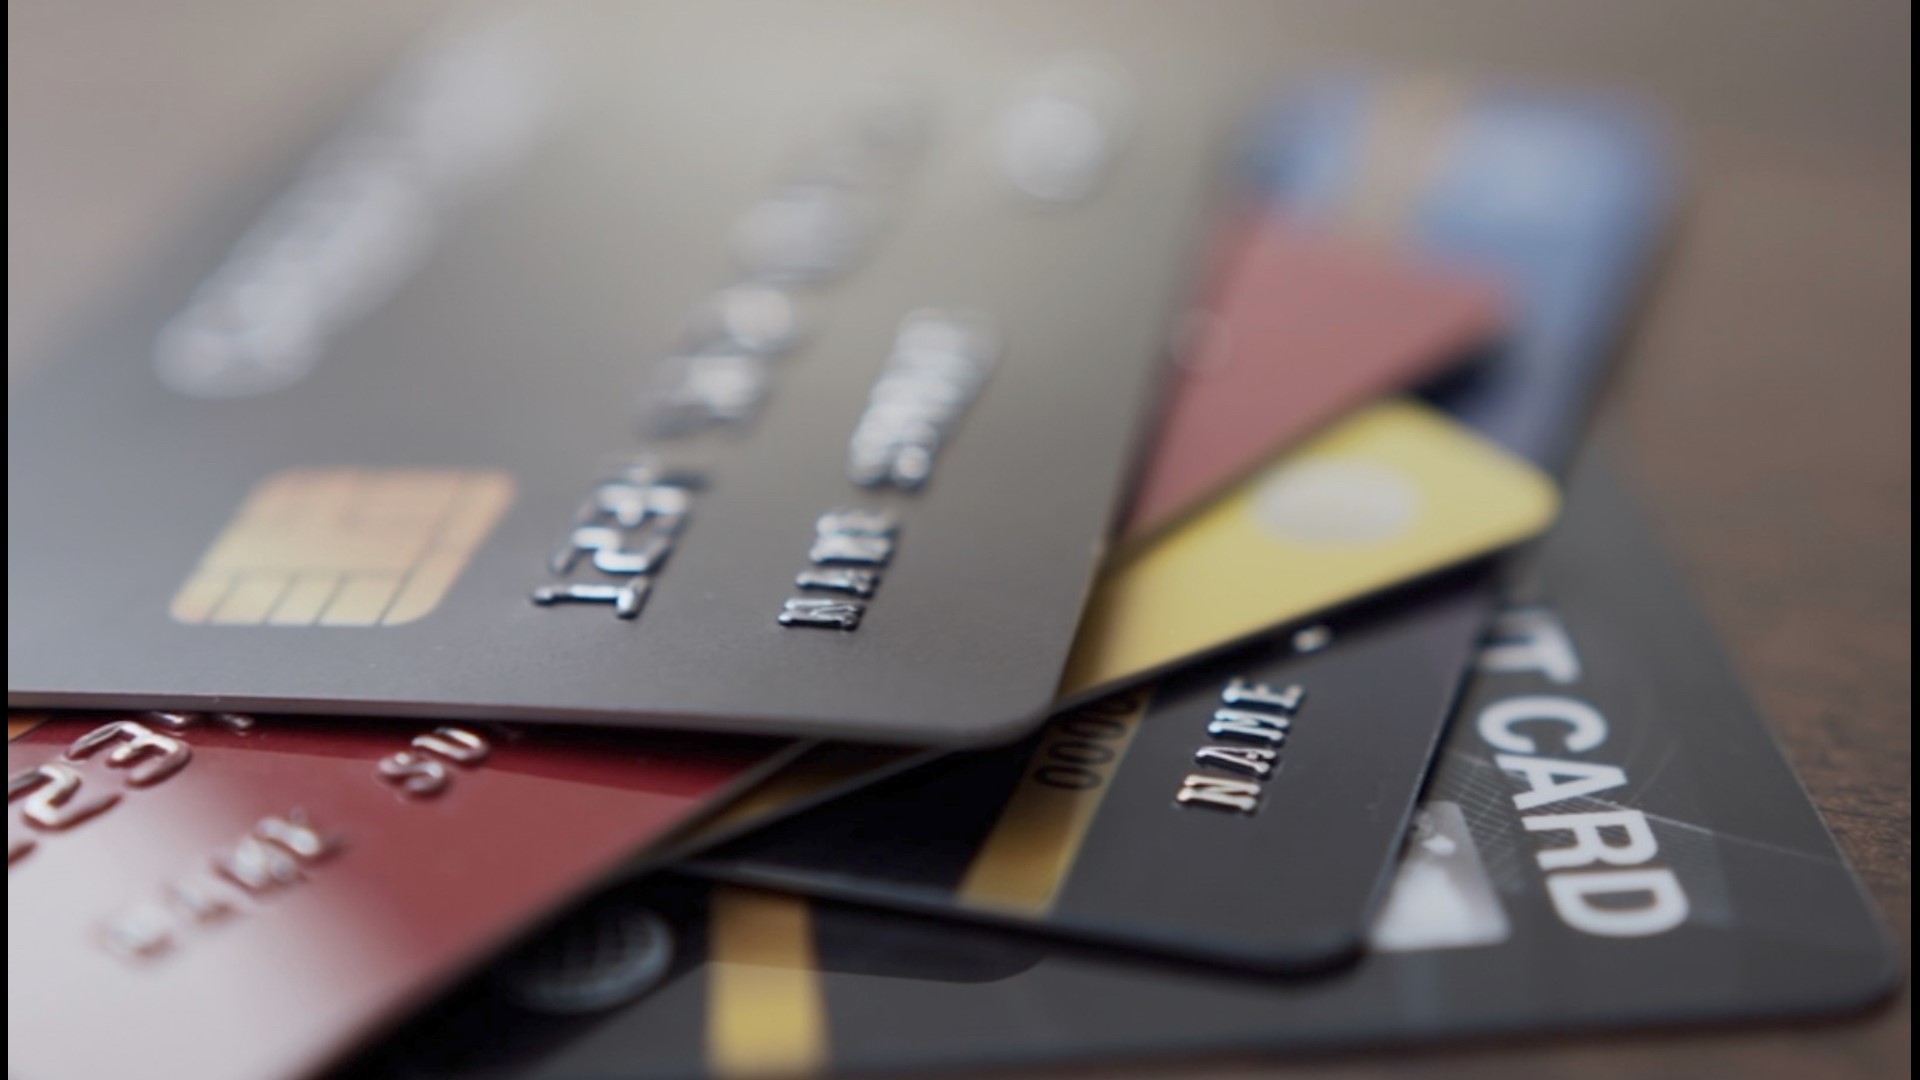 A few things in life are as satisfying as tapping and going, but watch it! When times are tough you may reconsider making these credit card mistakes. Buzz60's Maria Mercedes Galuppo has the story.